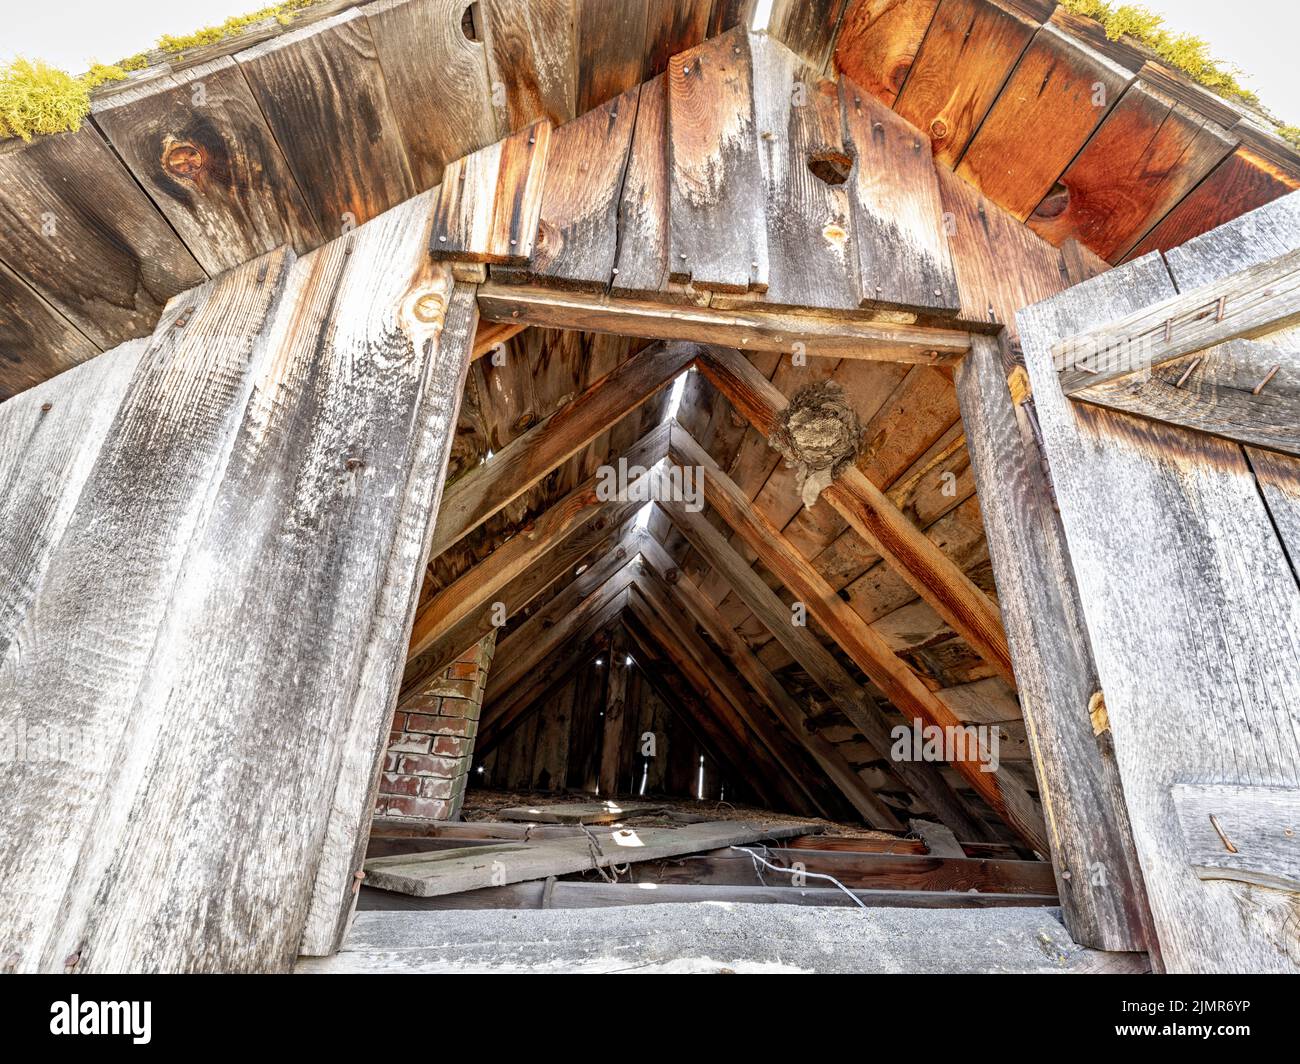 Attic beehive in an old wooden structure Stock Photo